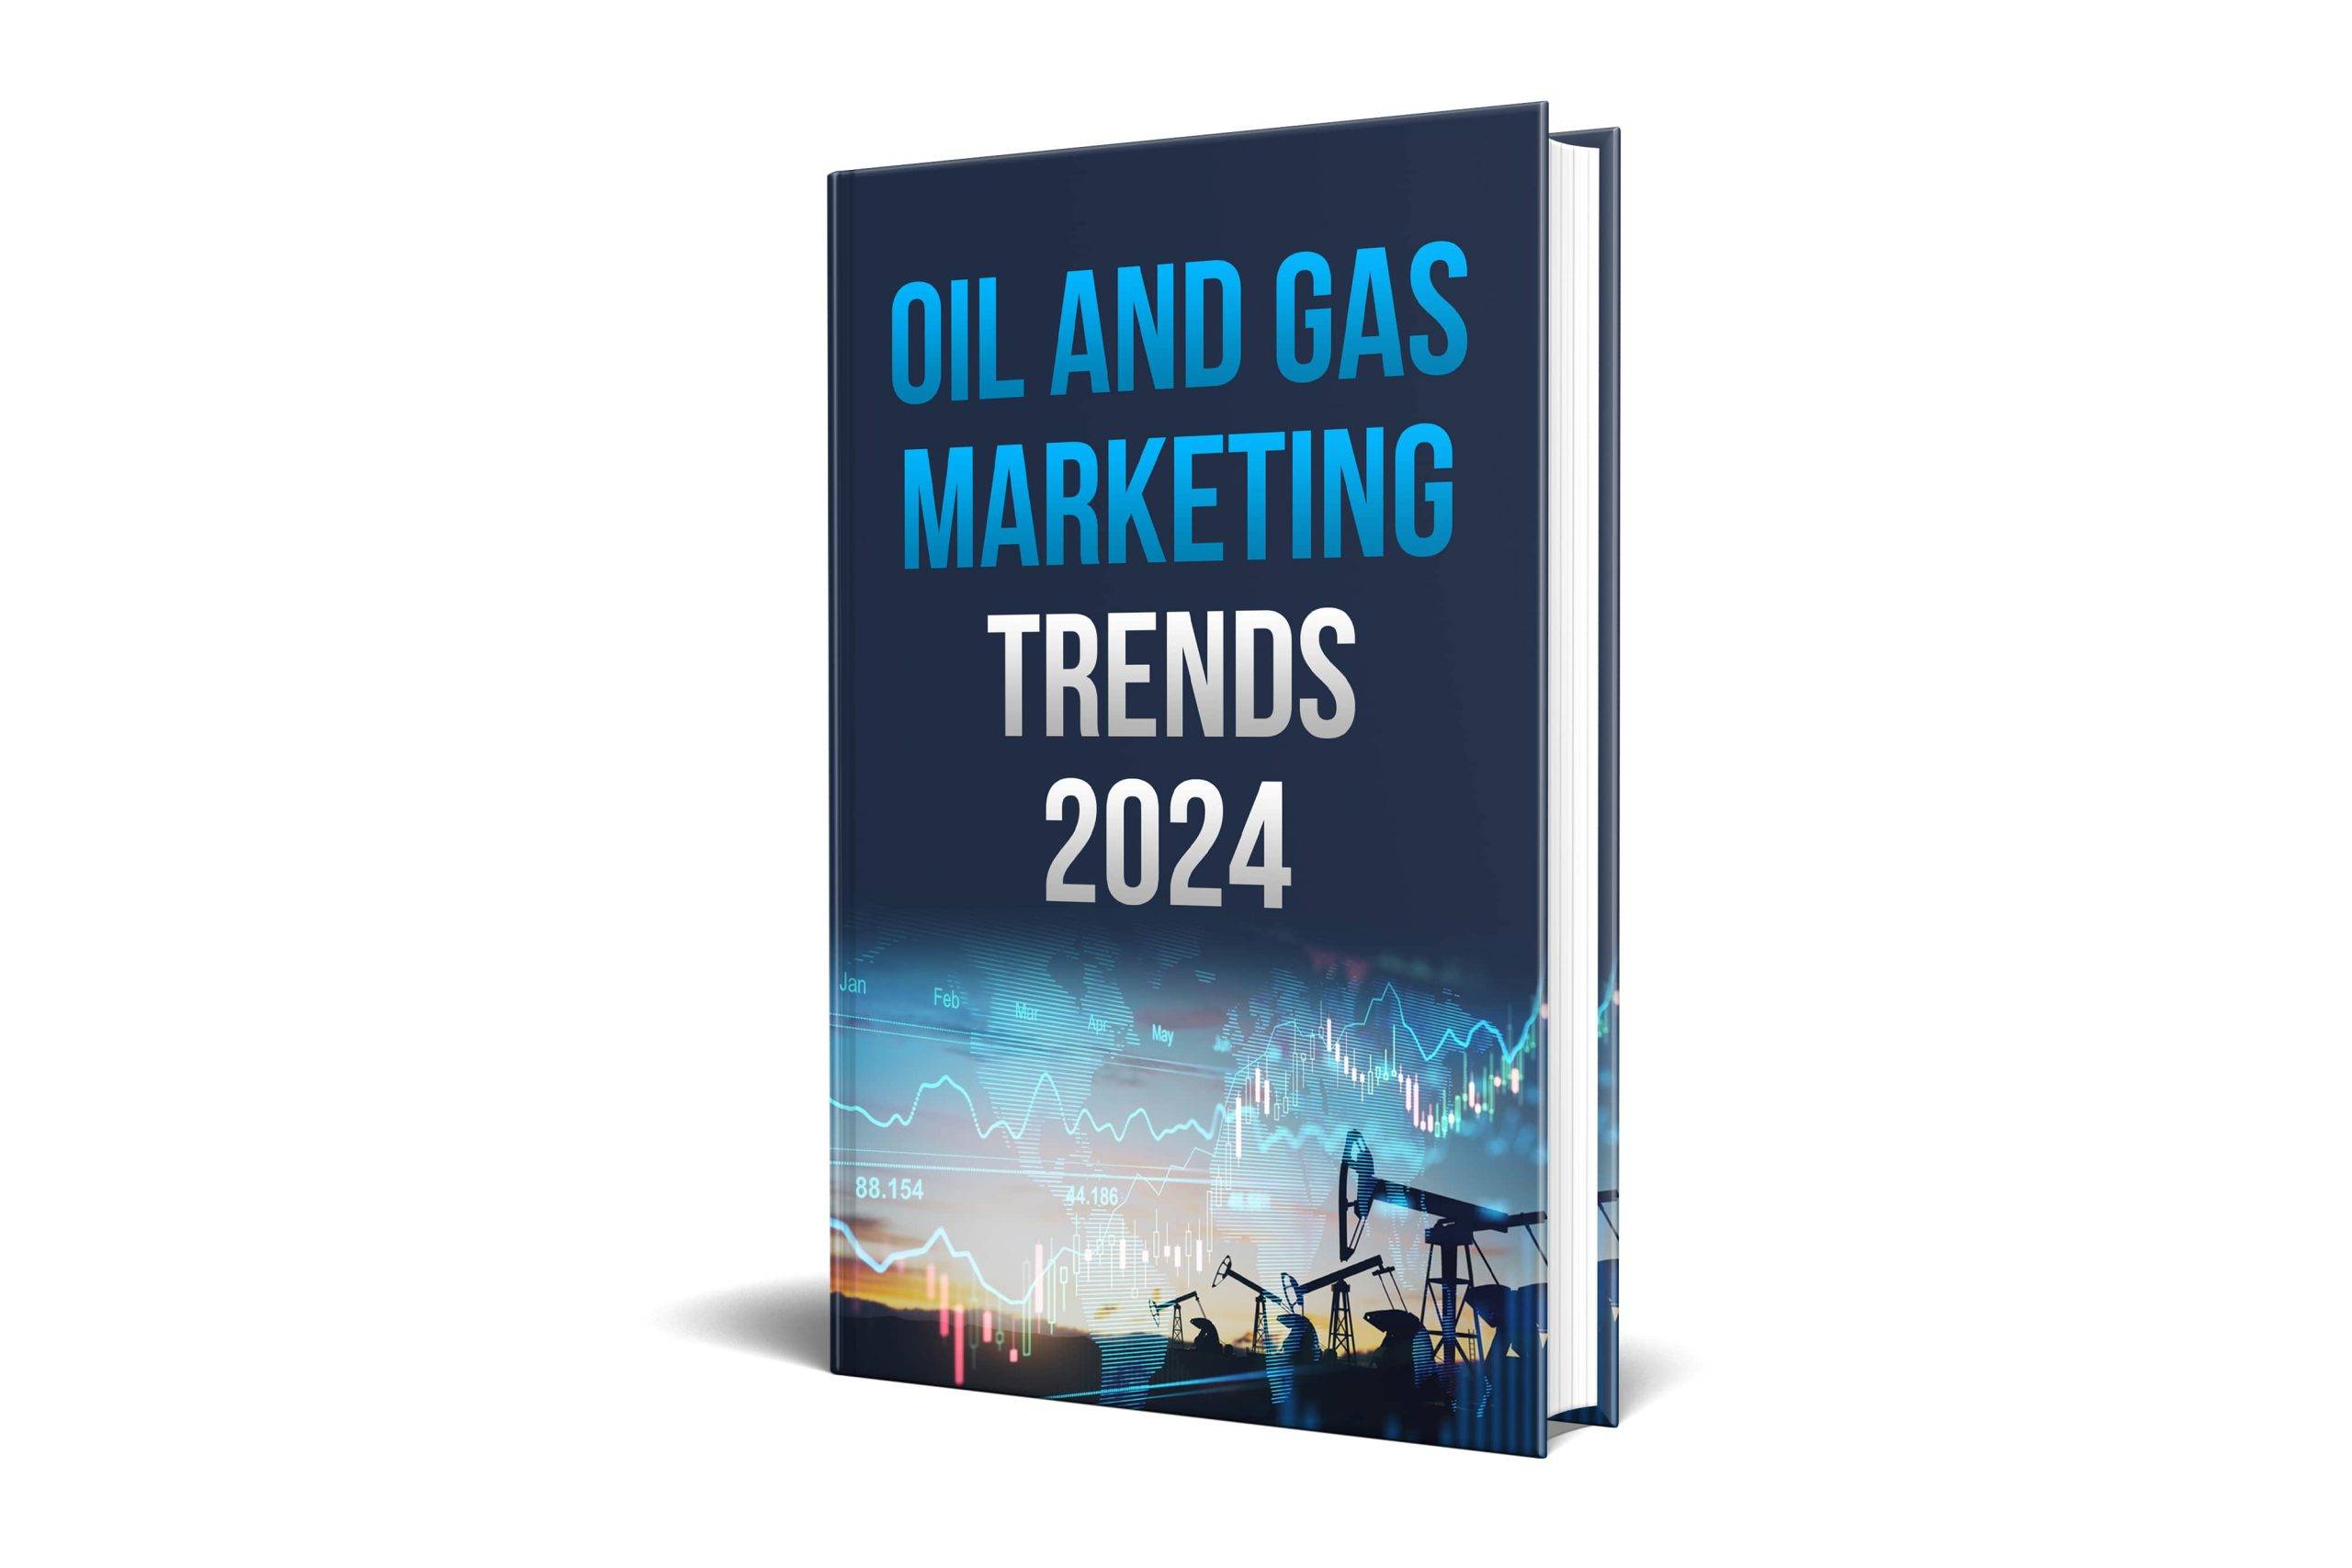 Oil and Gas Marketing 2024 Trends